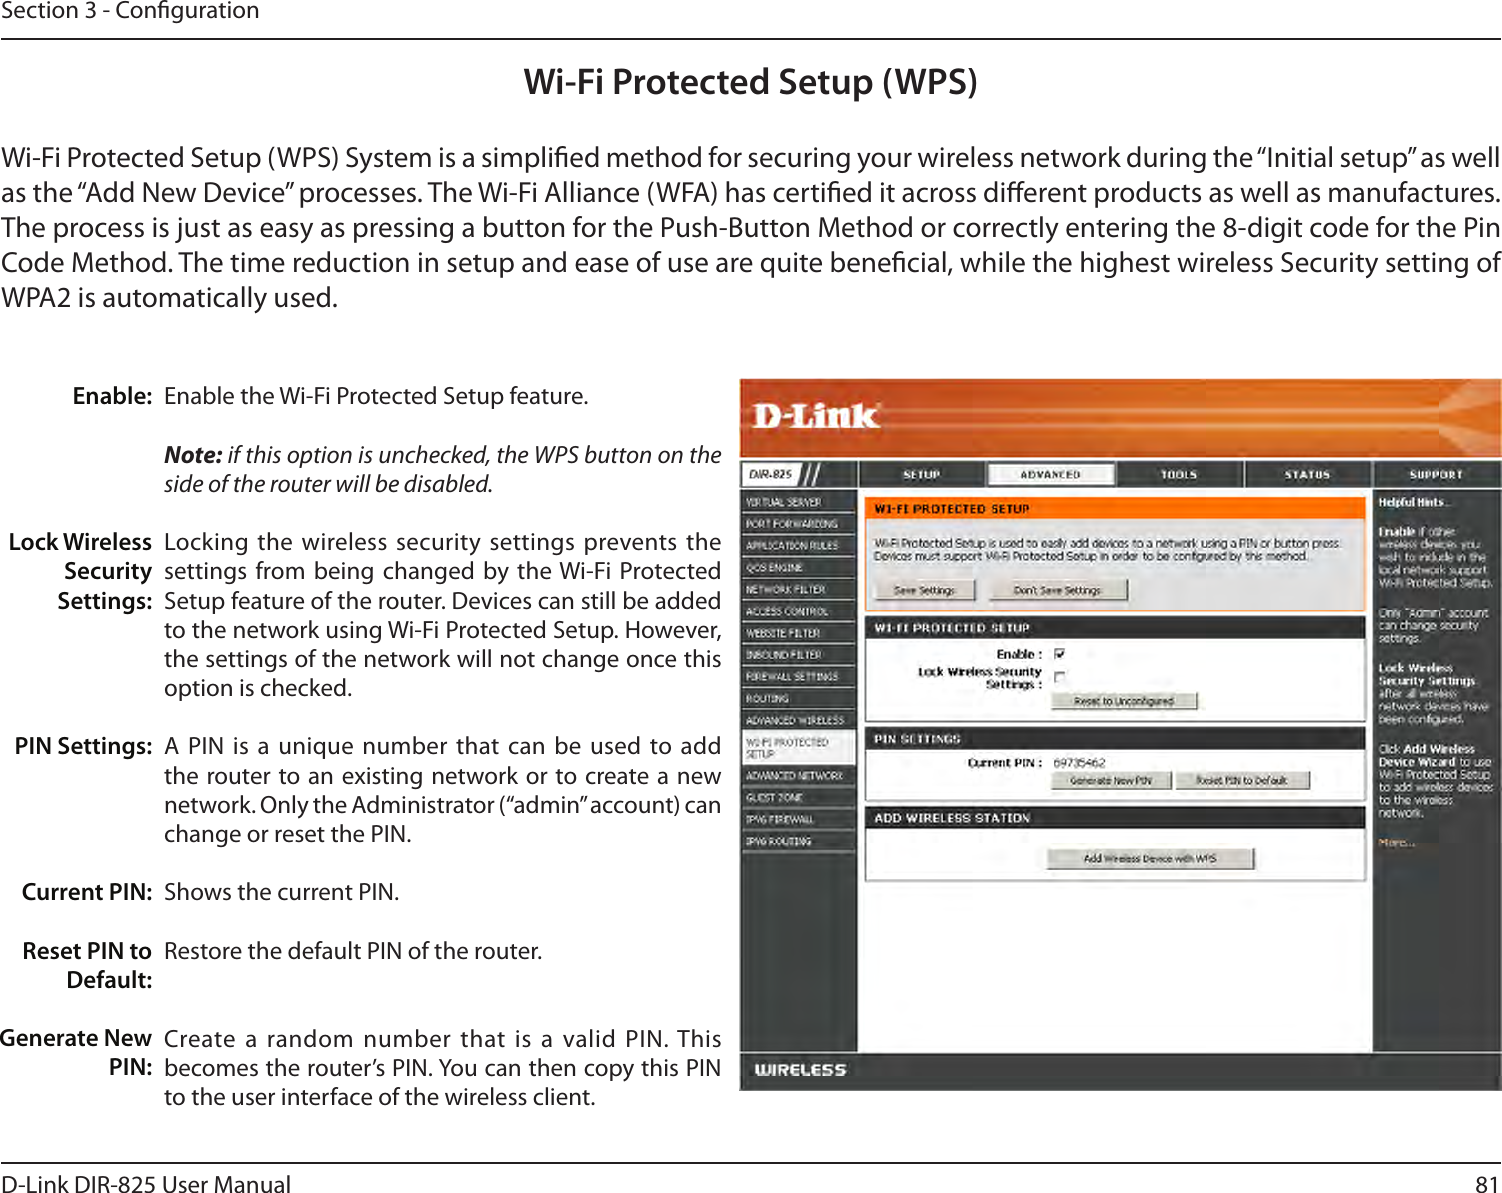 81D-Link DIR-825 User ManualSection 3 - CongurationWi-Fi Protected Setup (WPS)Enable the Wi-Fi Protected Setup feature. Note: if this option is unchecked, the WPS button on the side of the router will be disabled.Locking the  wireless security settings prevents the settings from being  changed by the Wi-Fi Protected Setup feature of the router. Devices can still be added to the network using Wi-Fi Protected Setup. However, the settings of the network will not change once this option is checked.A PIN  is a  unique number that can be  used to add the router to an existing network or to create a new network. Only the Administrator (“admin” account) can change or reset the PIN. Shows the current PIN. Restore the default PIN of the router. Create a  random number  that is  a valid  PIN. This becomes the router’s PIN. You can then copy this PIN to the user interface of the wireless client.Enable:Lock Wireless Security Settings:PIN Settings:Current PIN:Reset PIN to Default:Generate New PIN:Wi-Fi Protected Setup (WPS) System is a simplied method for securing your wireless network during the “Initial setup” as well as the “Add New Device” processes. The Wi-Fi Alliance (WFA) has certied it across dierent products as well as manufactures. The process is just as easy as pressing a button for the Push-Button Method or correctly entering the 8-digit code for the Pin Code Method. The time reduction in setup and ease of use are quite benecial, while the highest wireless Security setting of WPA2 is automatically used.